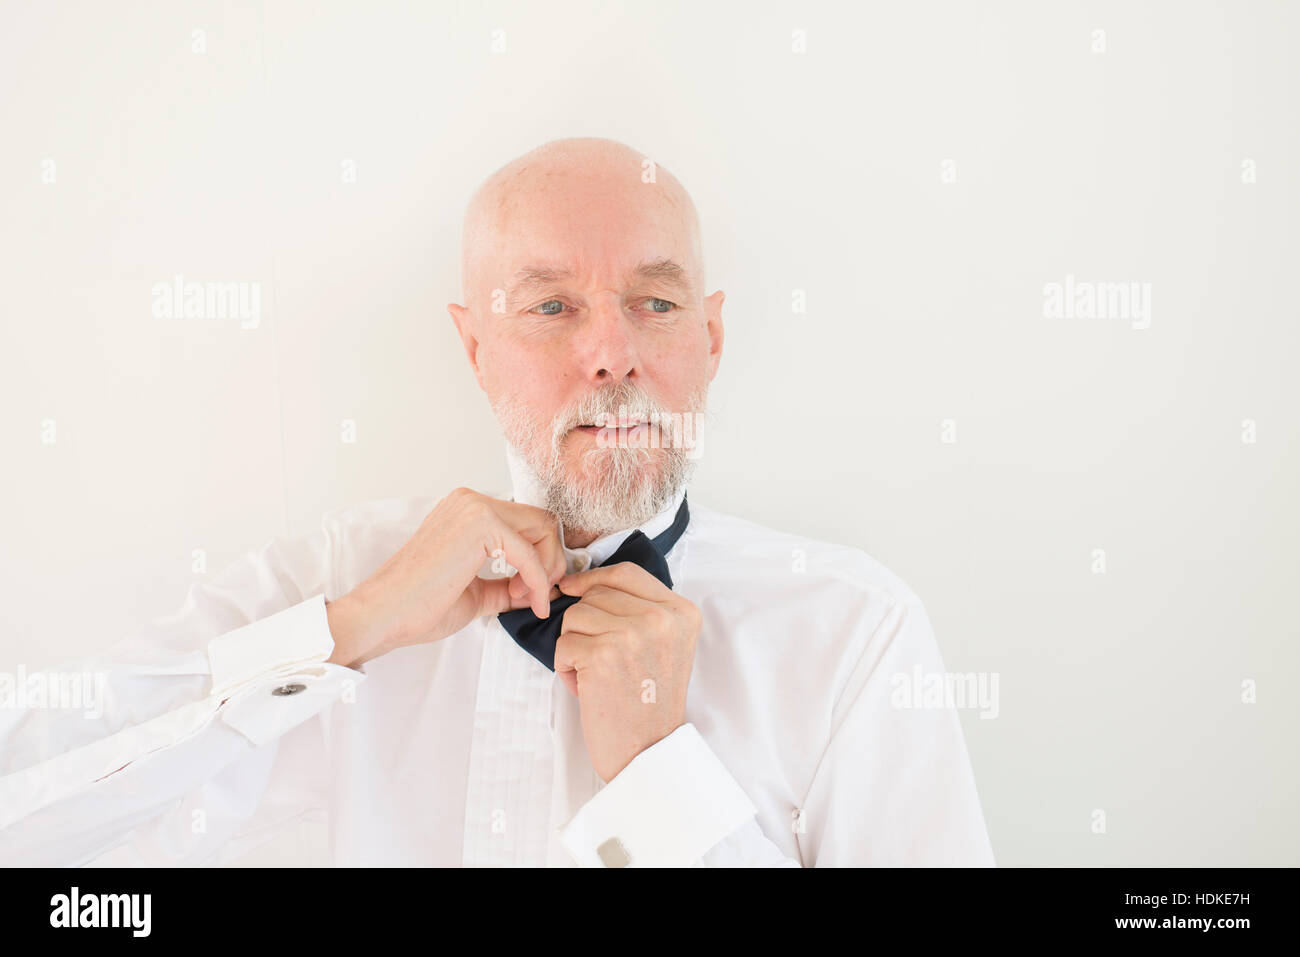 Old man putting on black bowtie and white shirt at home. Lifestyle moment of active retirement and preparing for wedding party or elegant occasion. Stock Photo